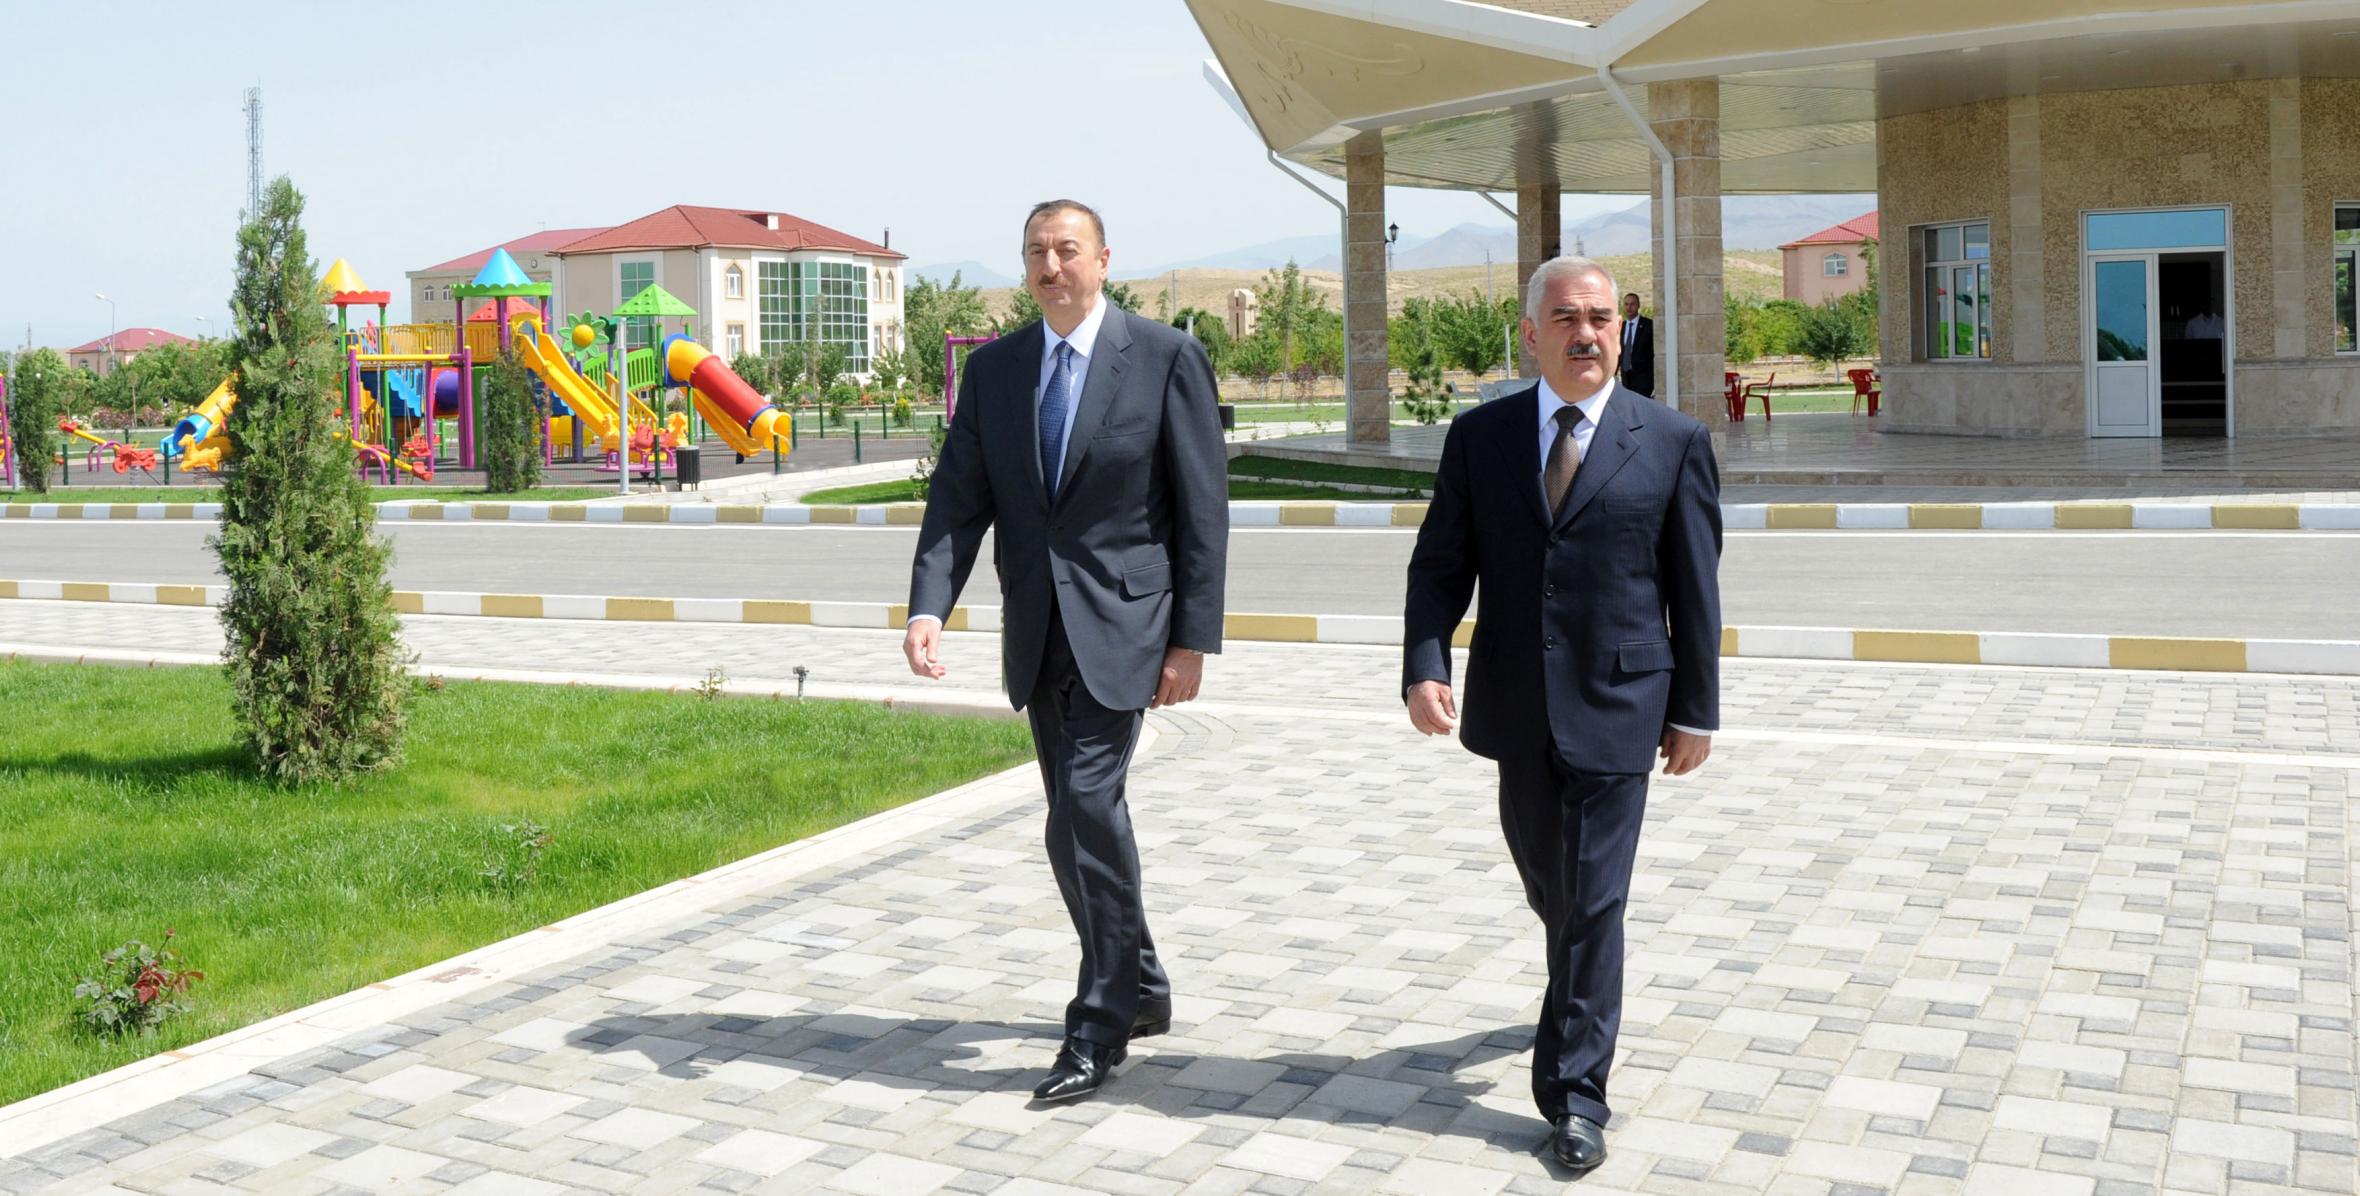 Ilham Aliyev reviewed a park and attended the opening of a culture center in Kangarli District